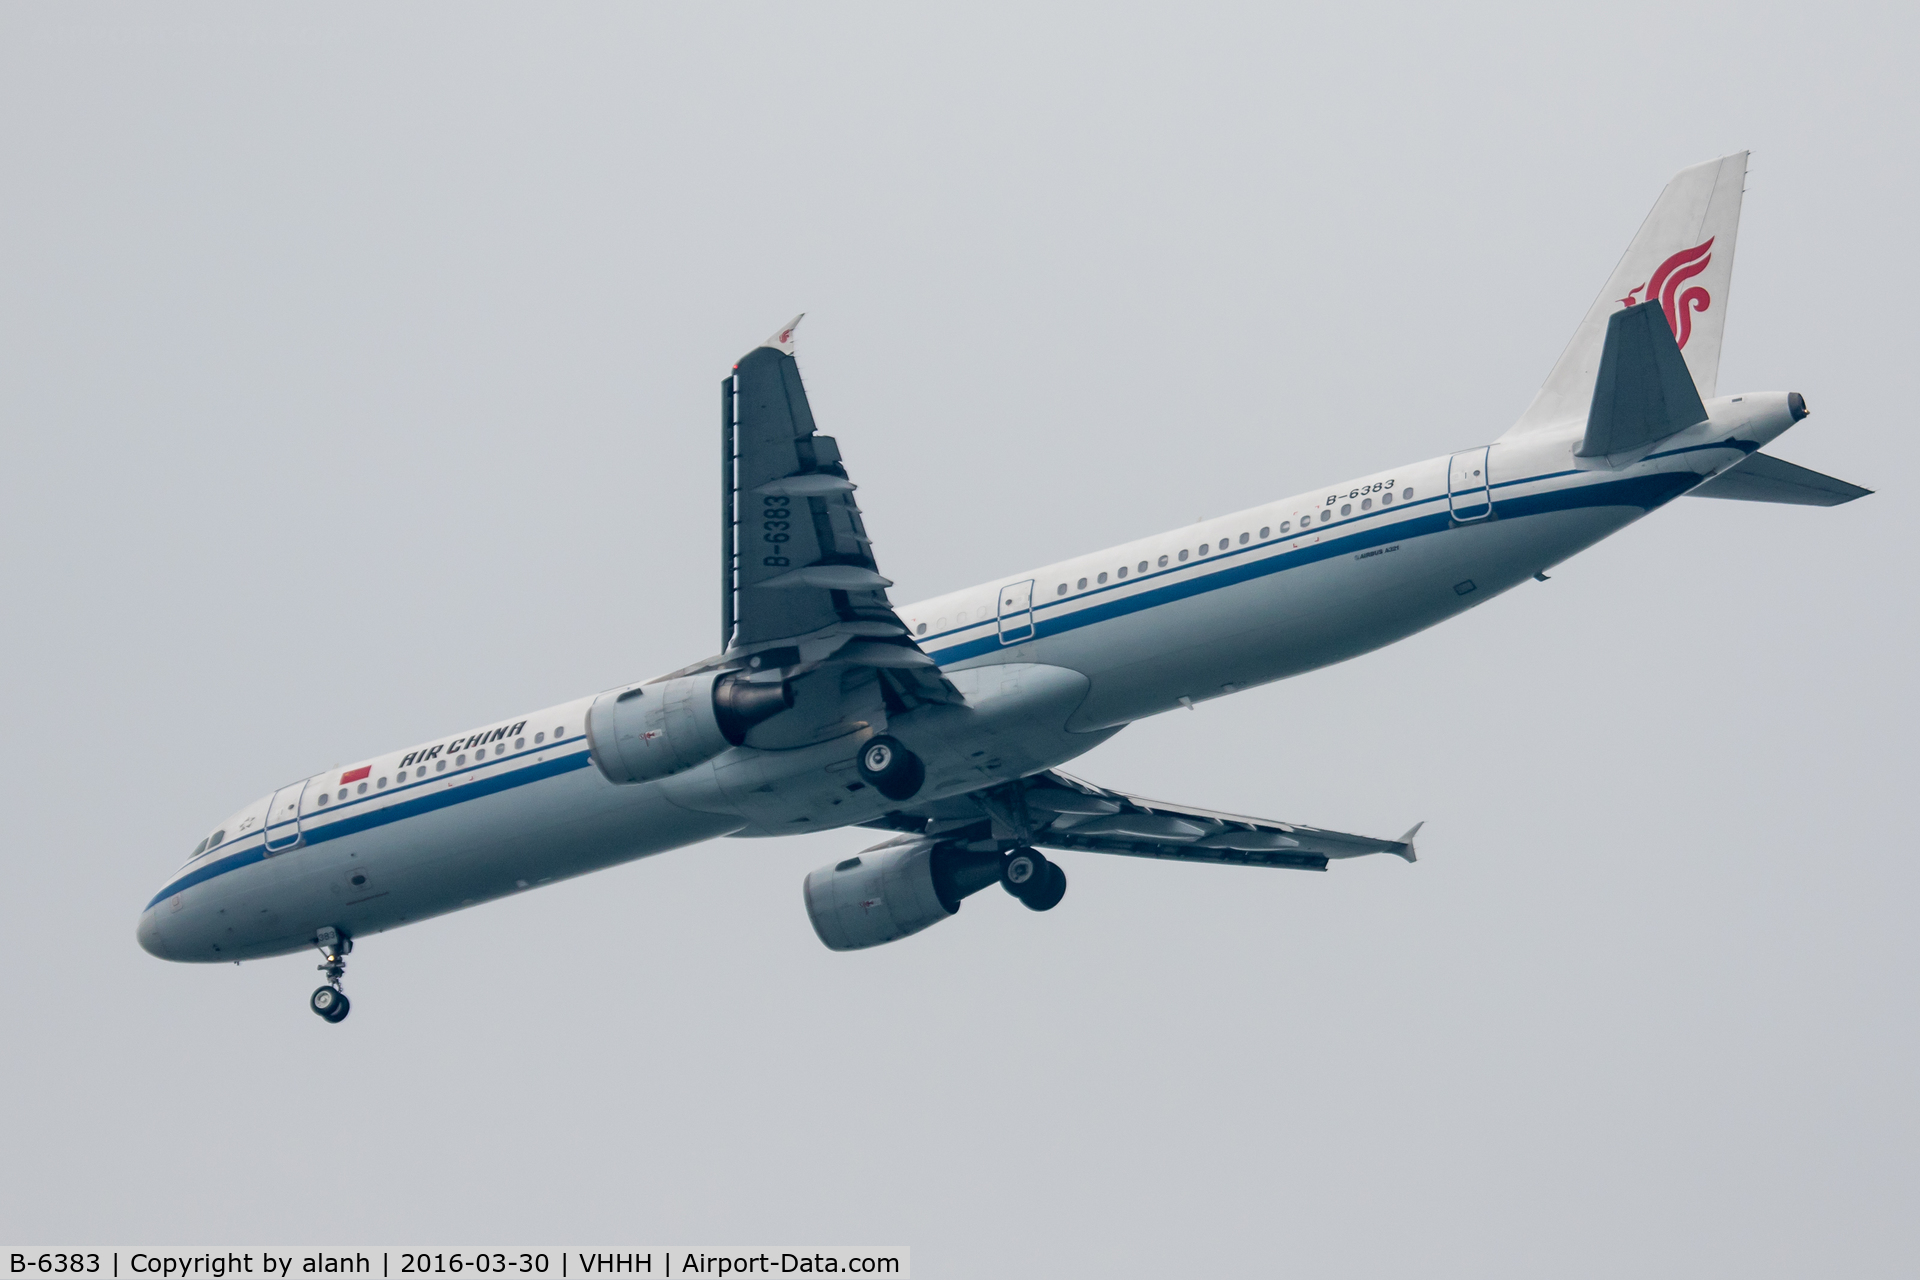 B-6383, 2008 Airbus A321-213 C/N 3678, On finals for Hong Kong, inbound from Beijing Capital Int'l